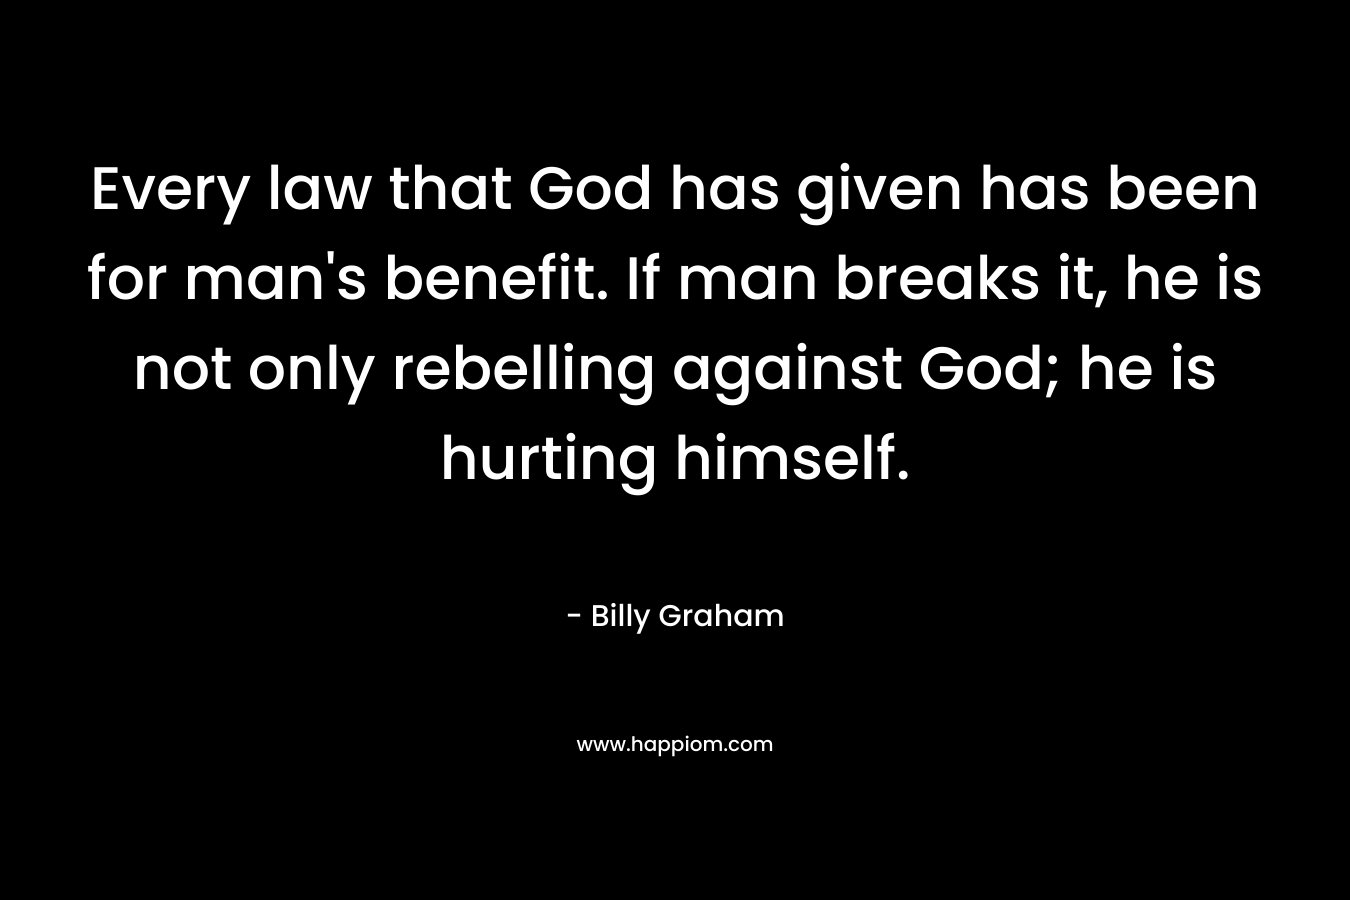 Every law that God has given has been for man's benefit. If man breaks it, he is not only rebelling against God; he is hurting himself.